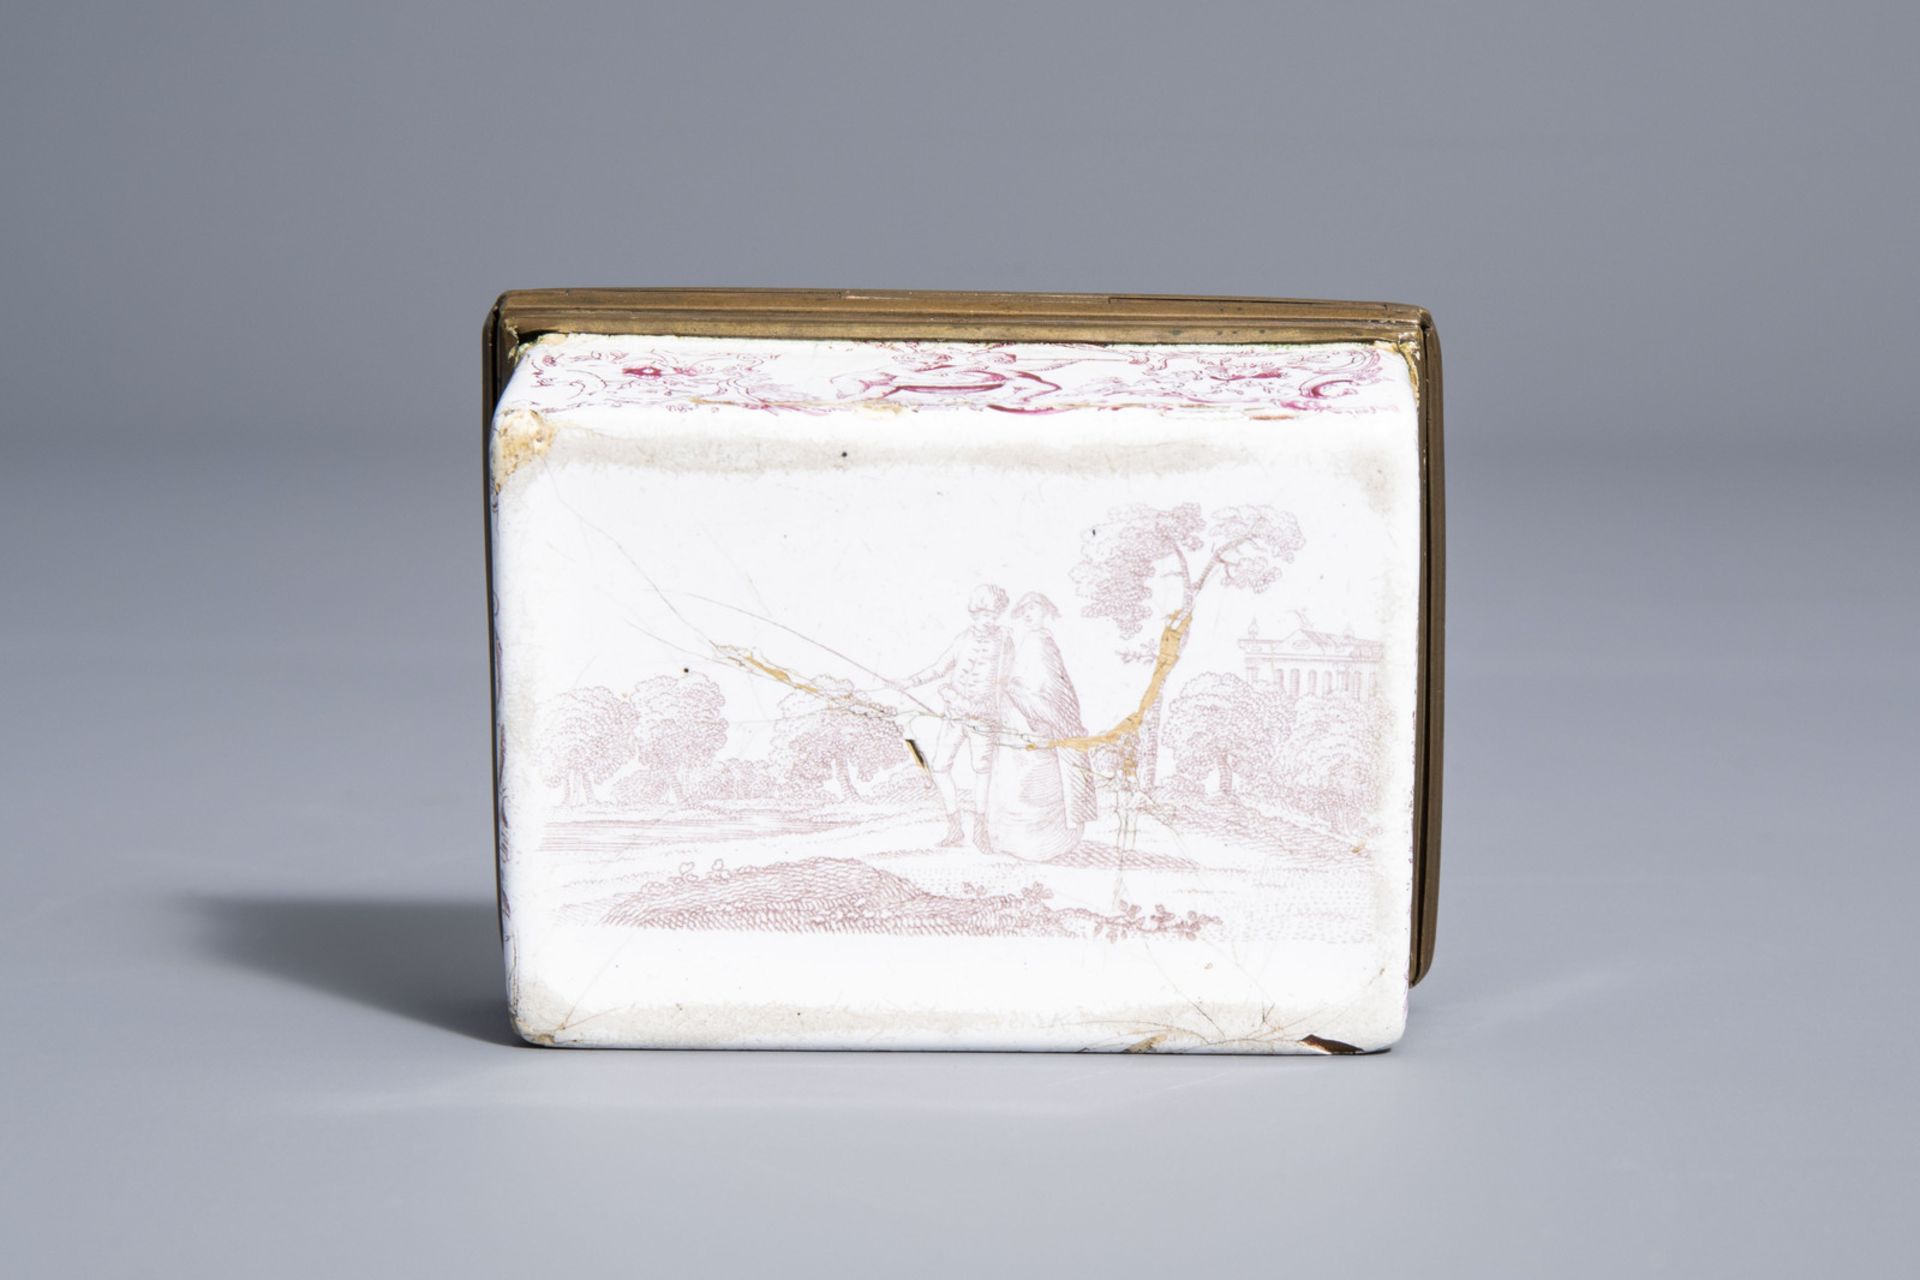 A painted enamel tobacco box, Battersea, England, second half of the 18th C. - Image 7 of 8